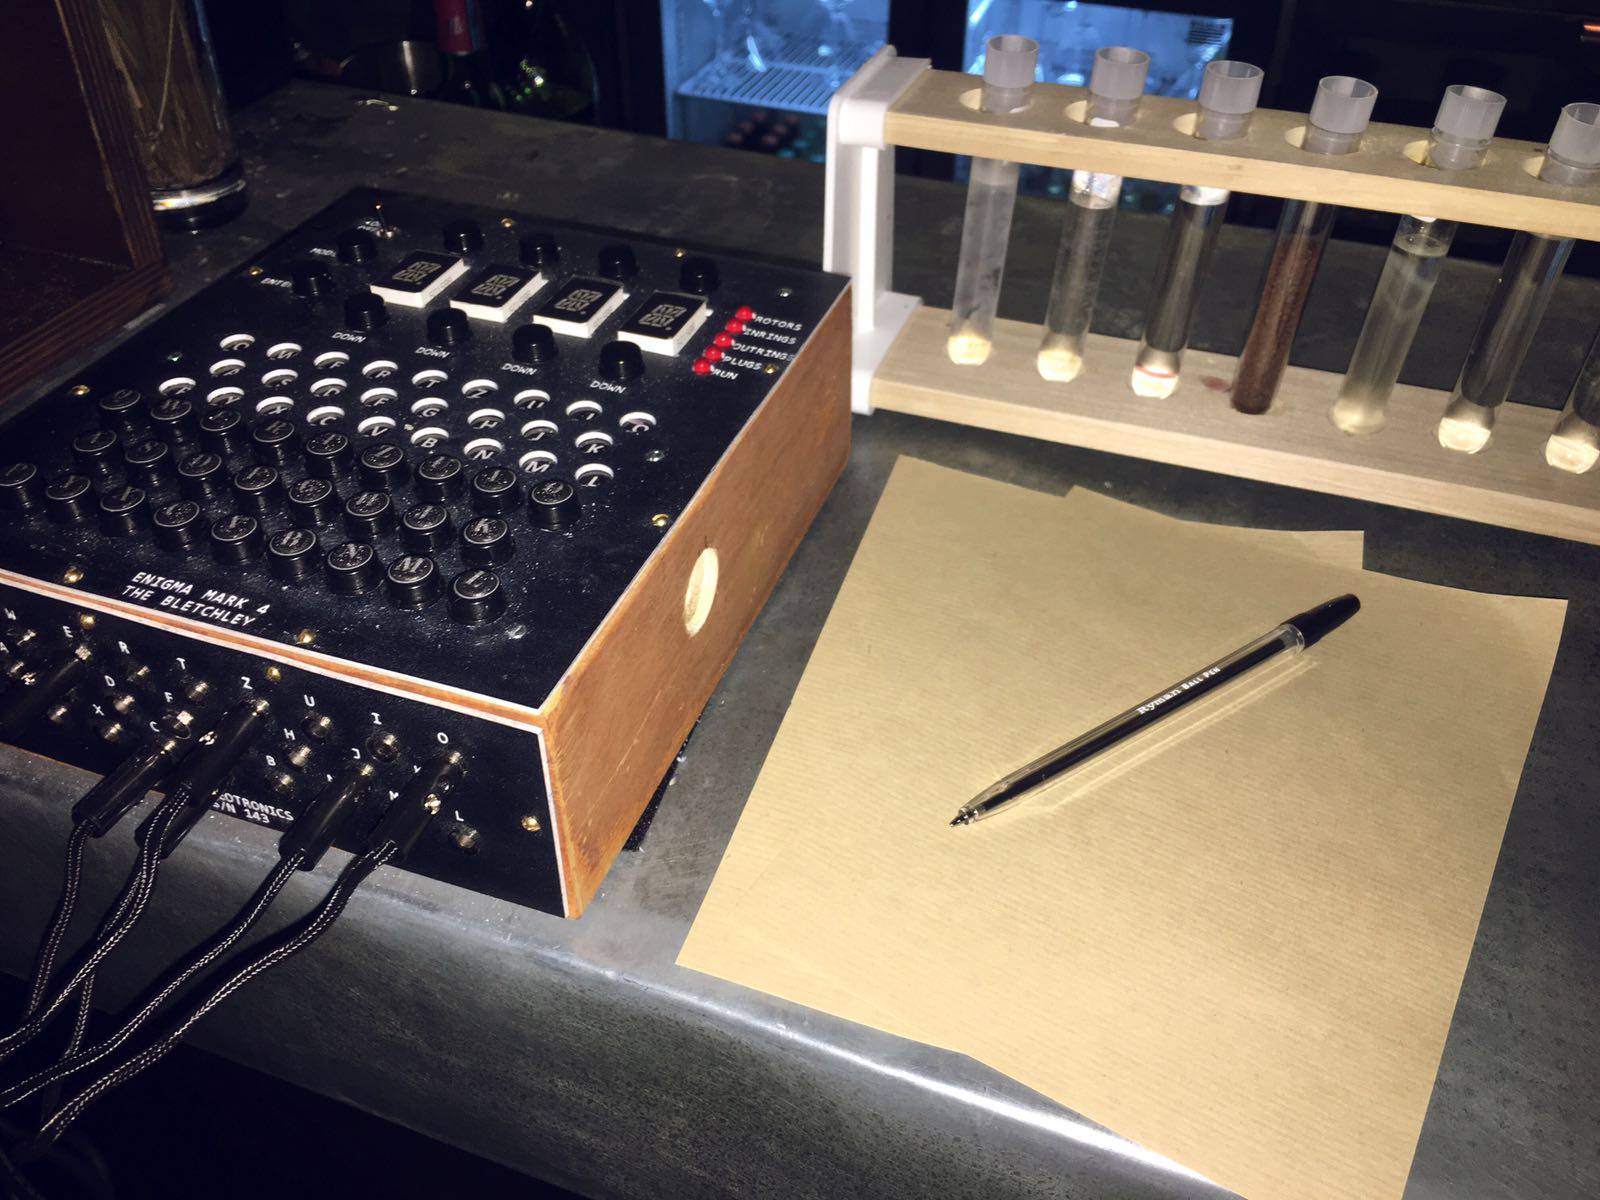 Enigma Machines @ The Bletchley: London's Code-Cracking Cocktail Bar